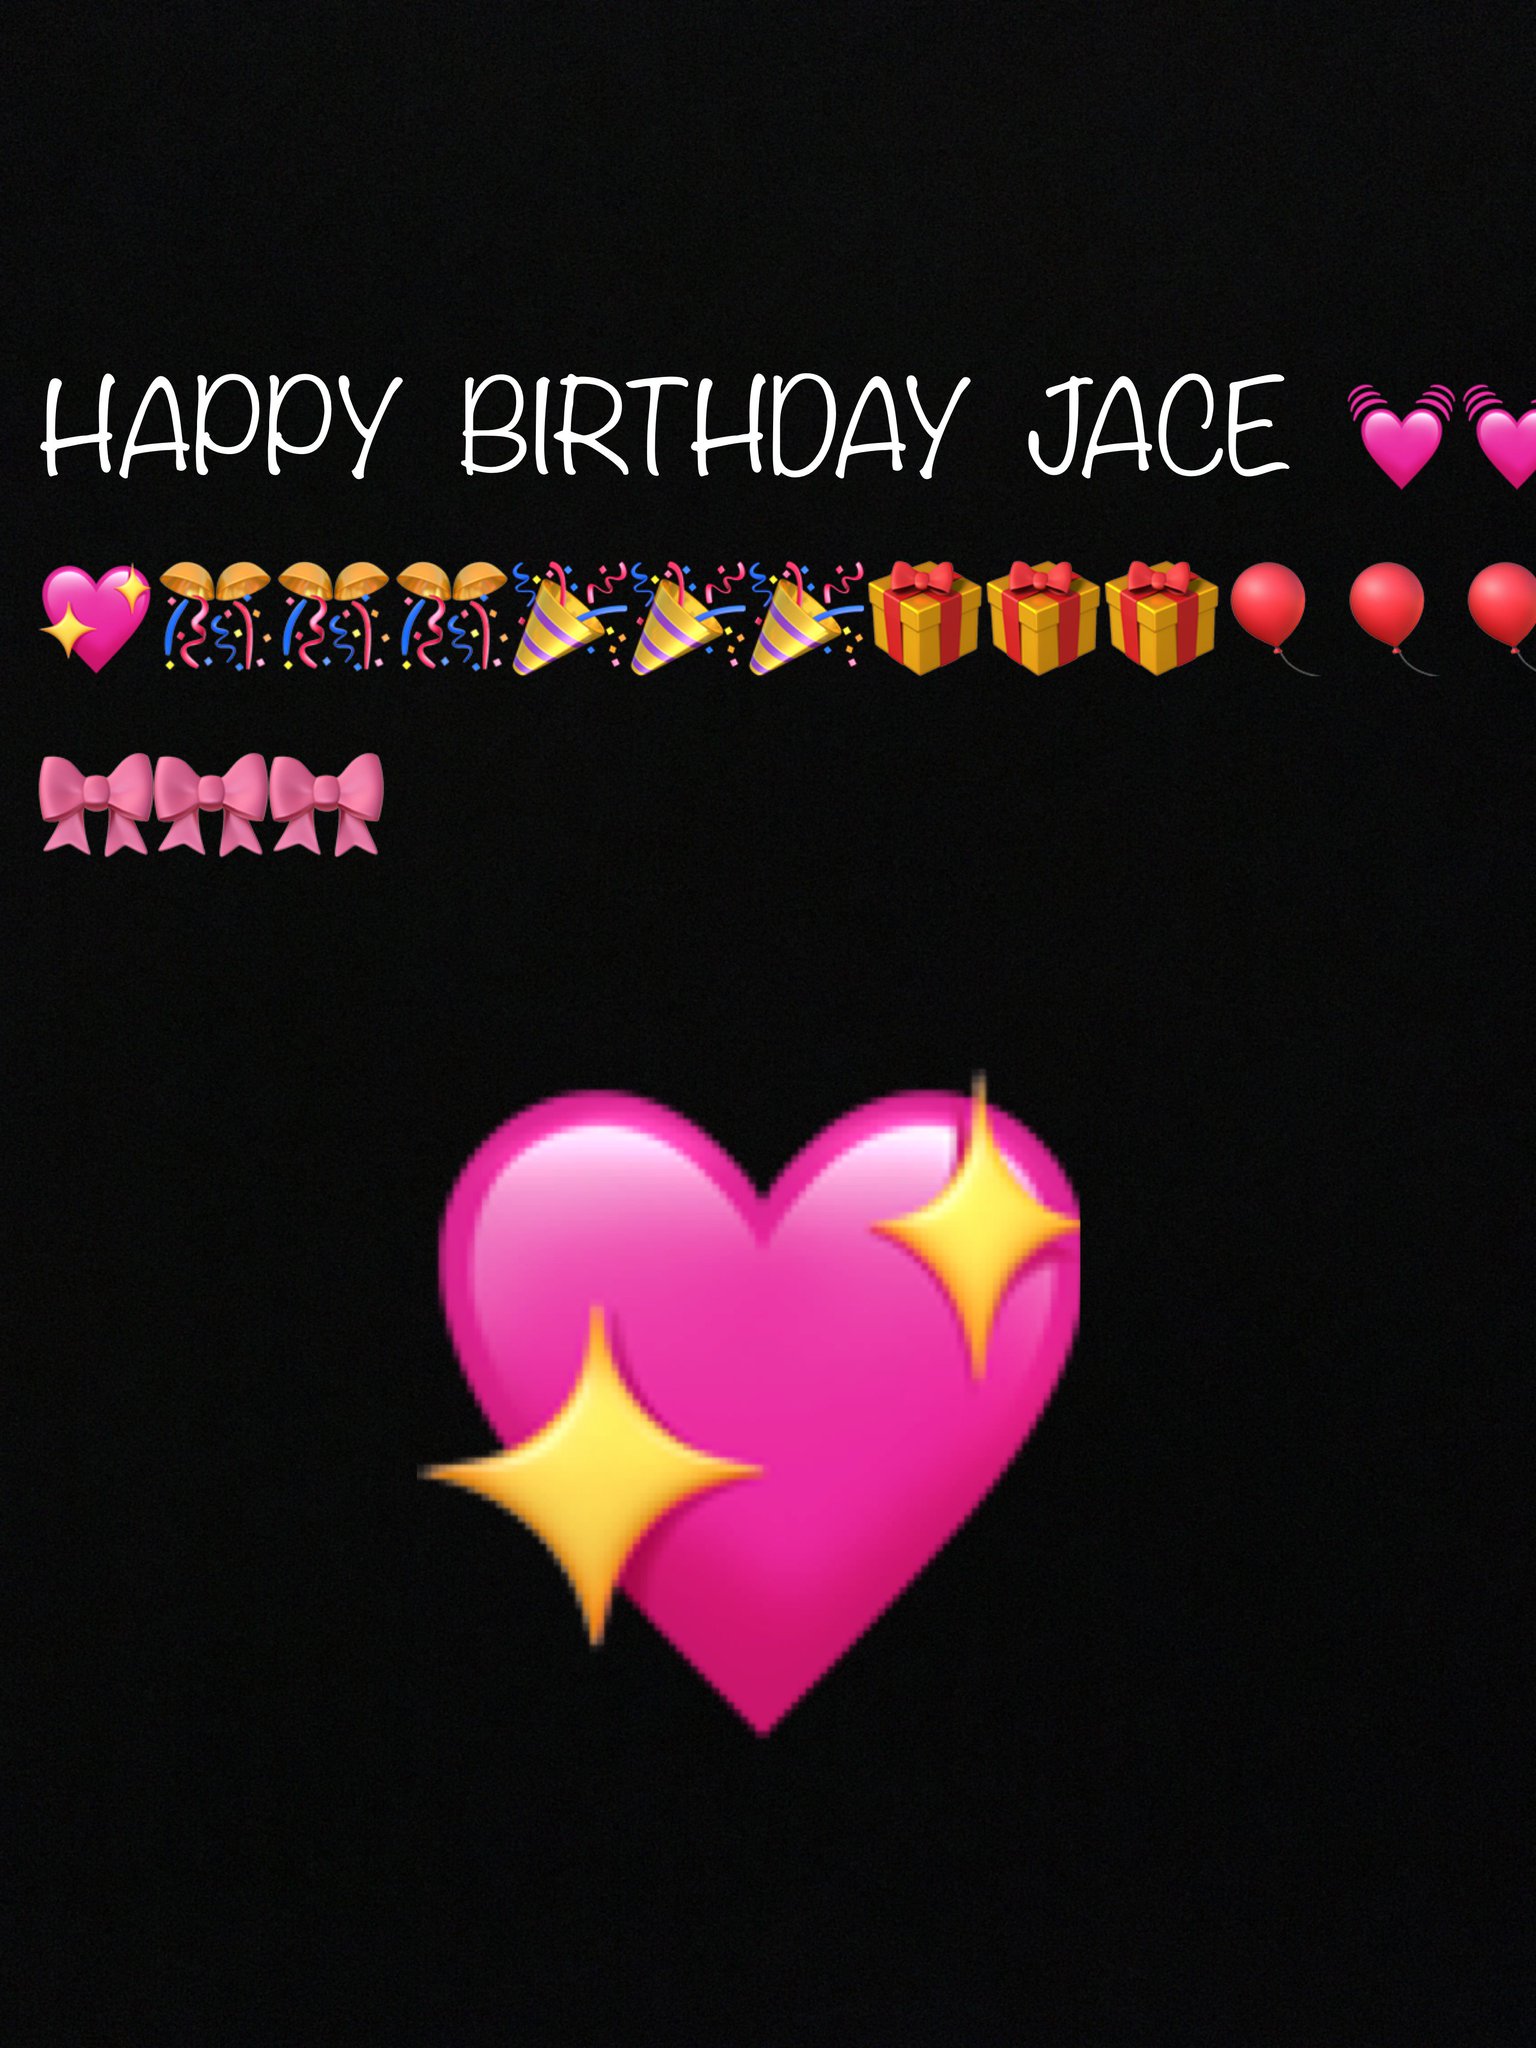 Happy birthday Jace Norman thanks for being our entertainers!! 